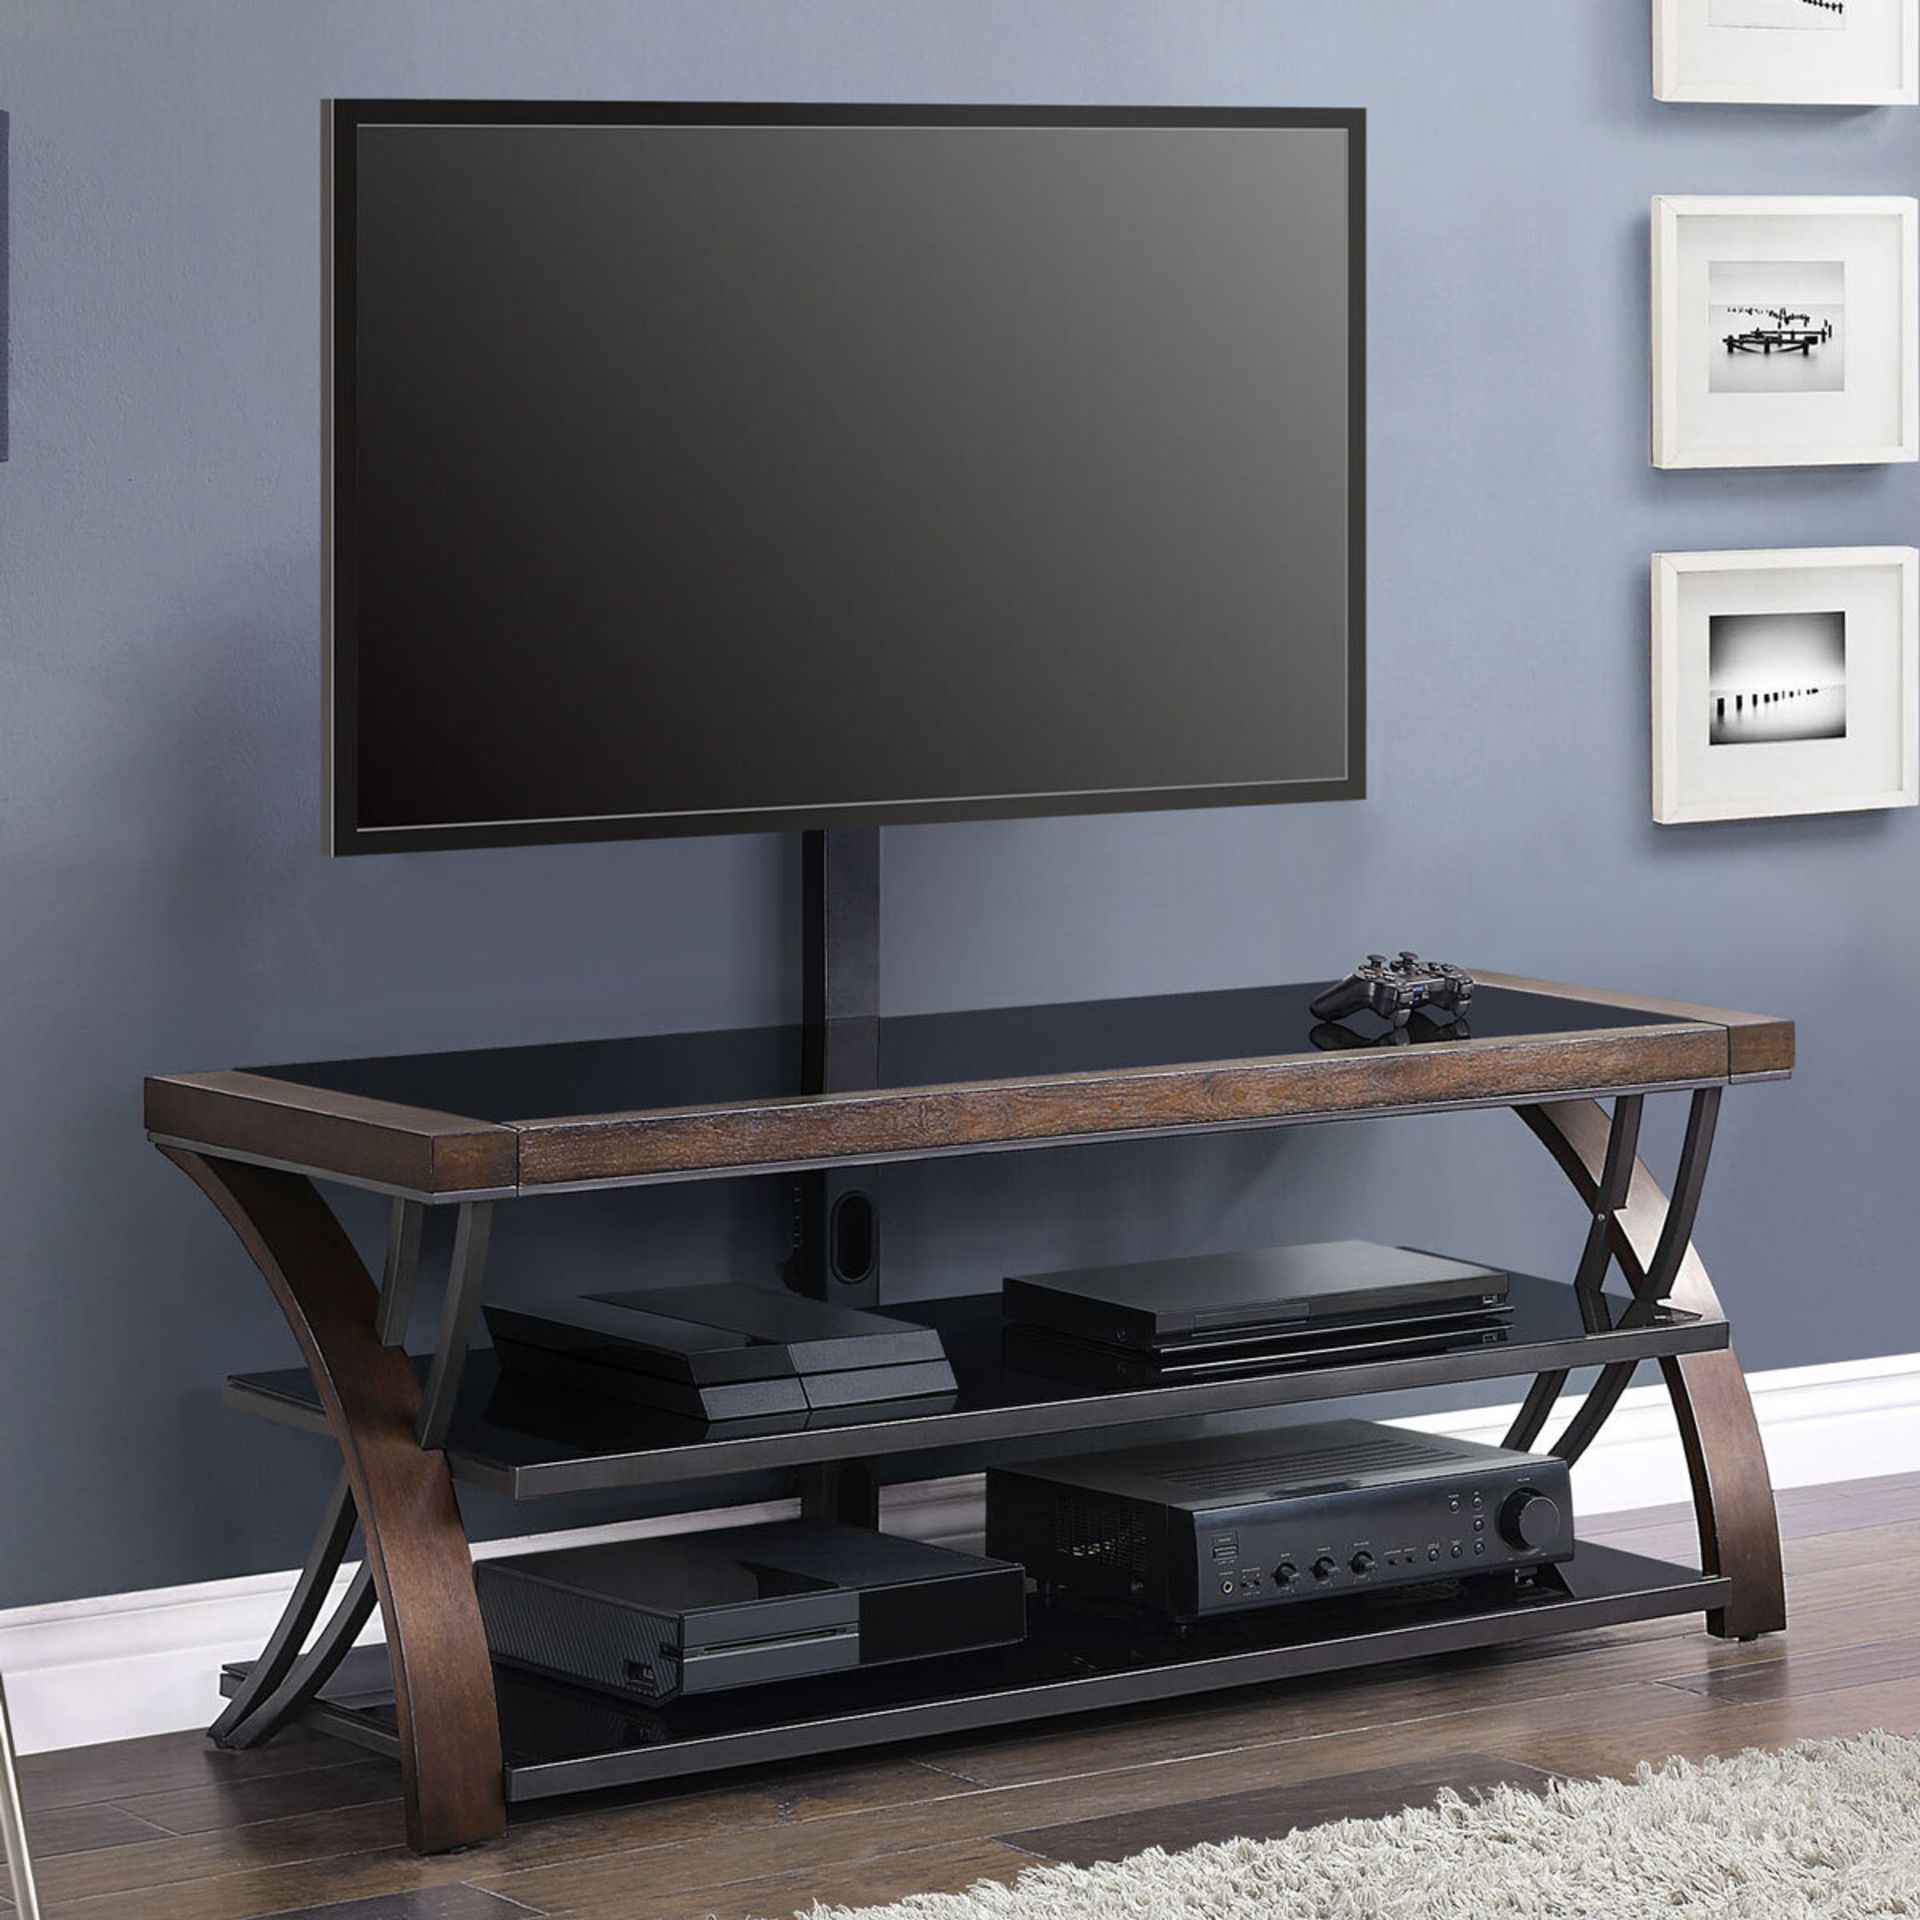 1 BAYSIDE FURNISHINGS BURKEDALE 3-IN-1 TV STAND FOR TVS UP TO 65" RRP Â£249 (GENERIC IMAGE GUIDE)